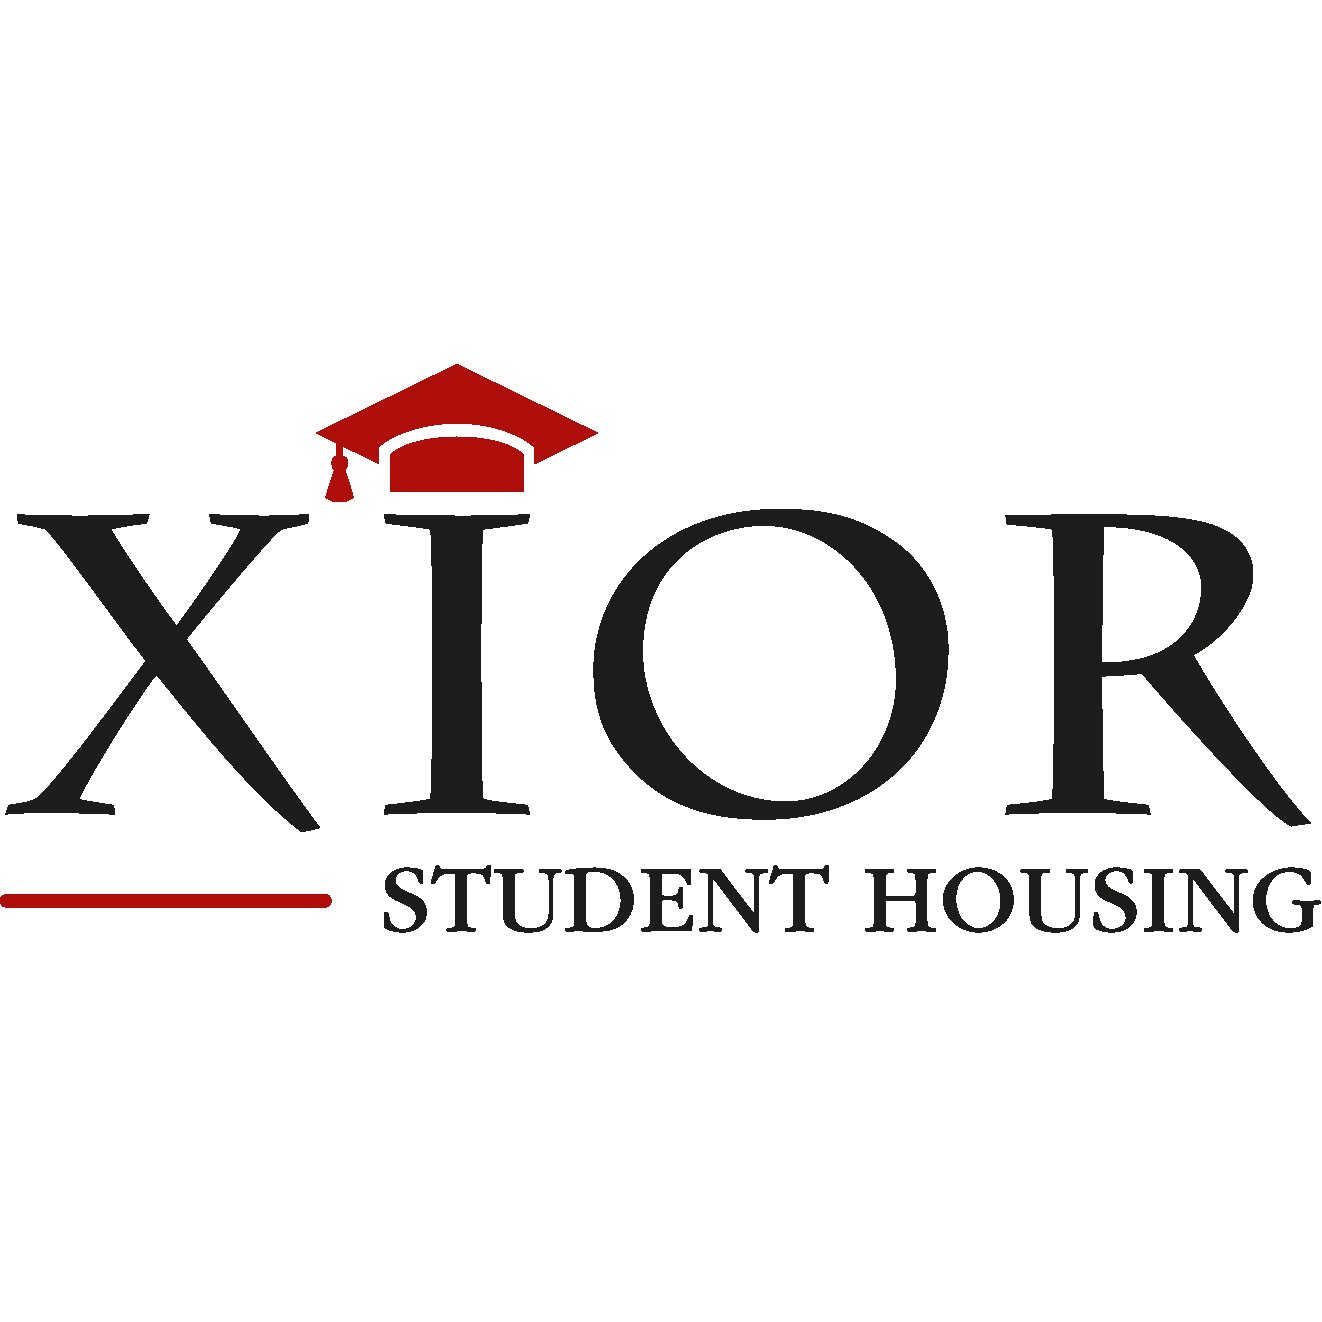 xior-student-housing-logo-red-png.png